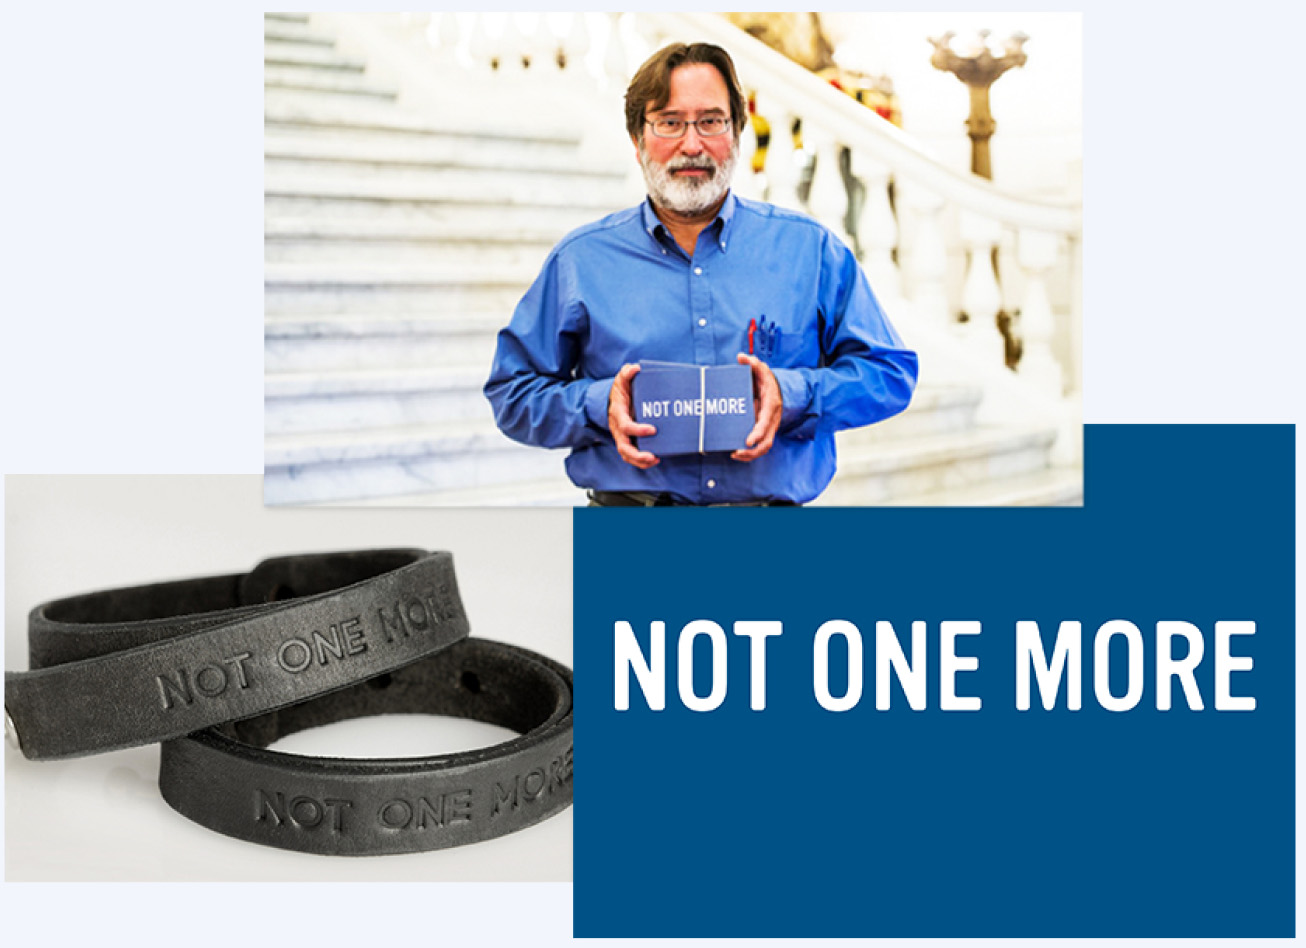 Wristbands and design collateral for the Not One More campaign